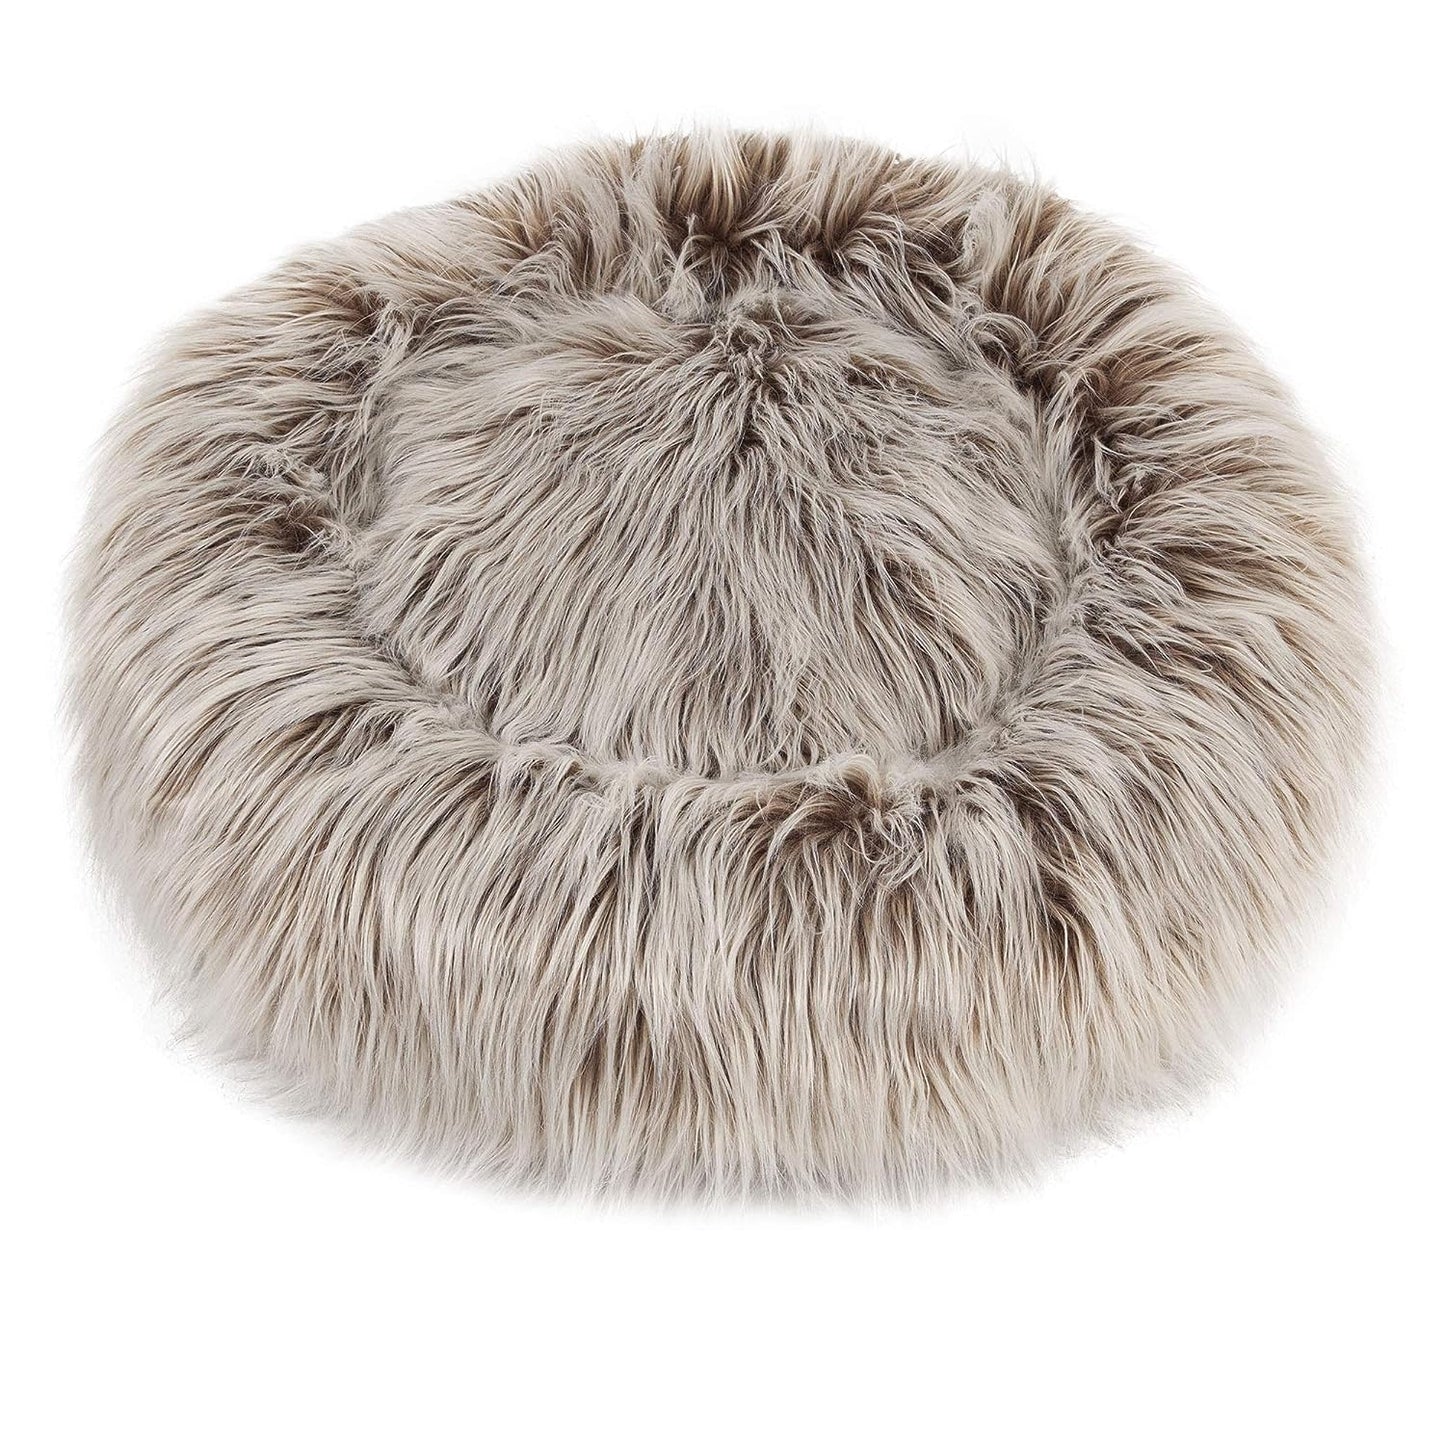 CAMA 26" SNOOZZY GLAMPET DONUT FAUX